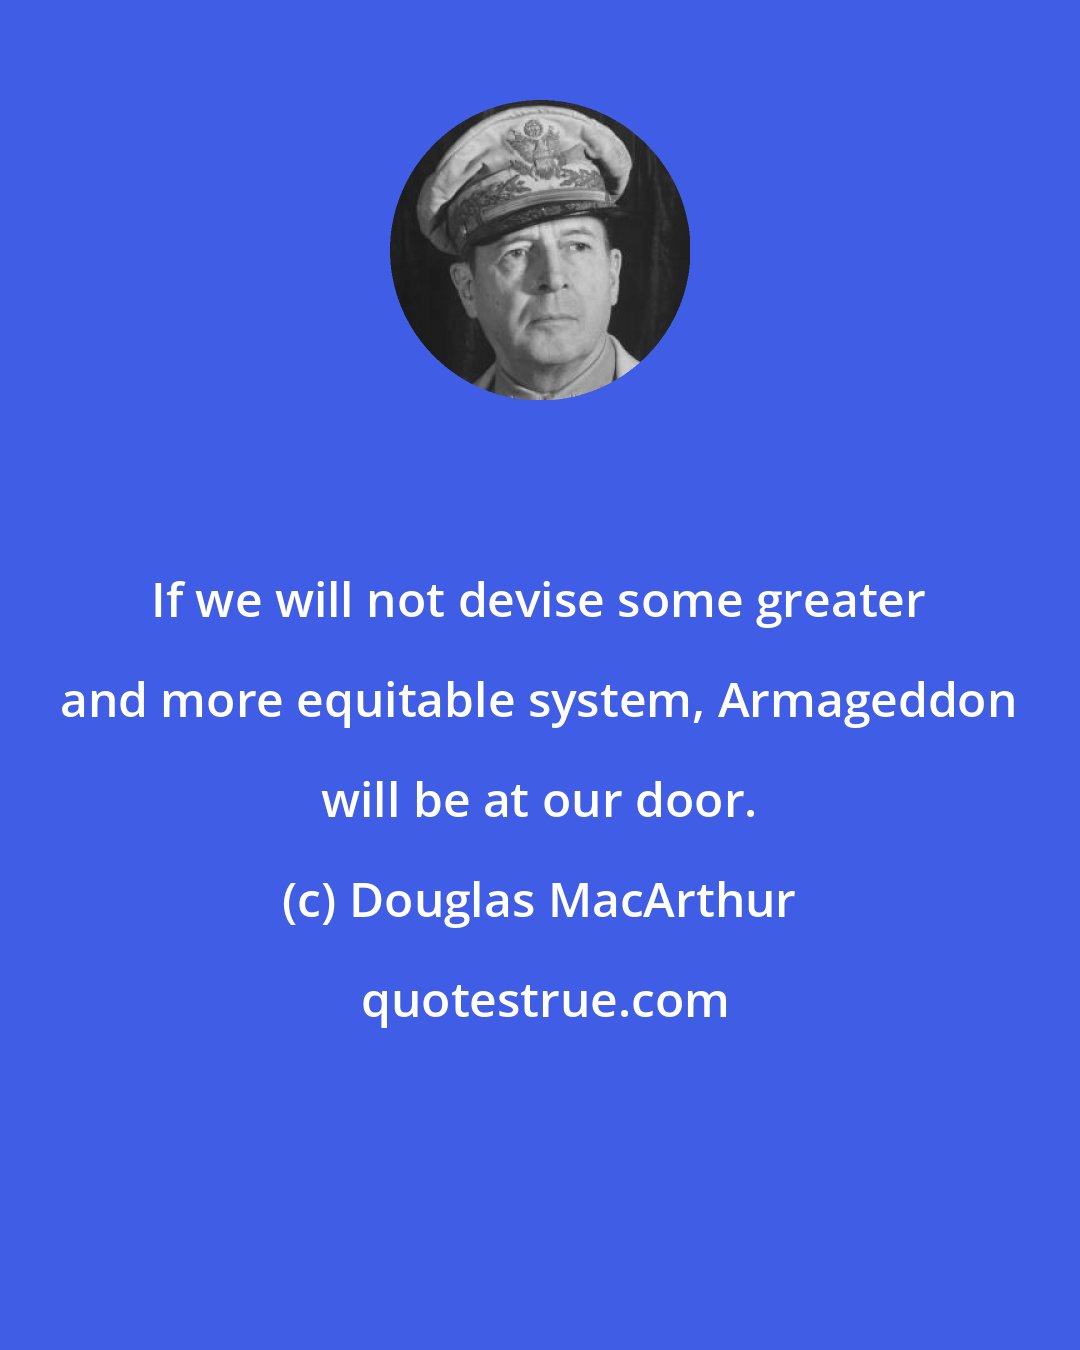 Douglas MacArthur: If we will not devise some greater and more equitable system, Armageddon will be at our door.